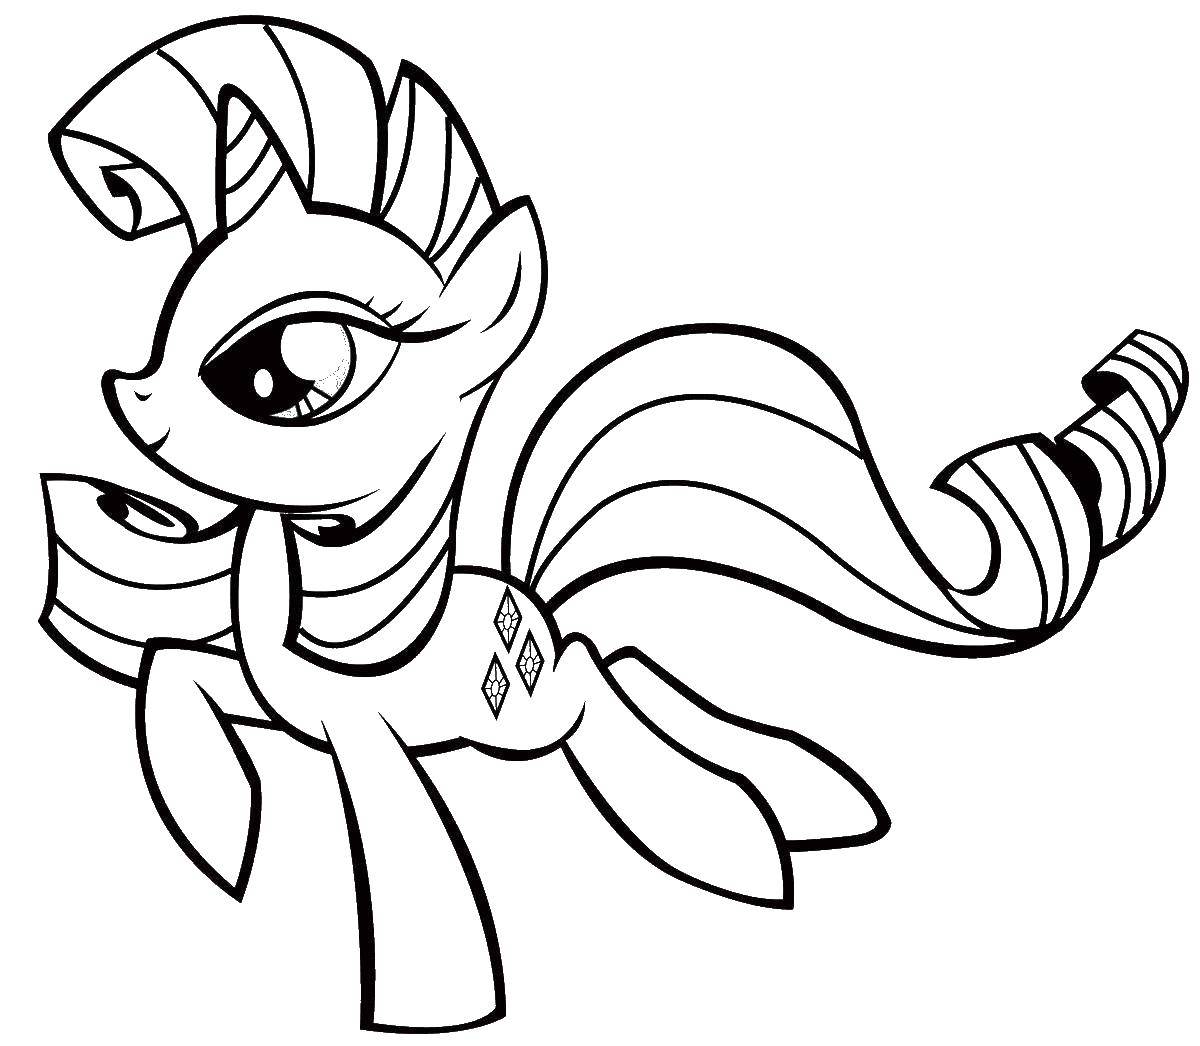 Coloring Rarity pony. Category my little pony. Tags:  my little pony, rarity.